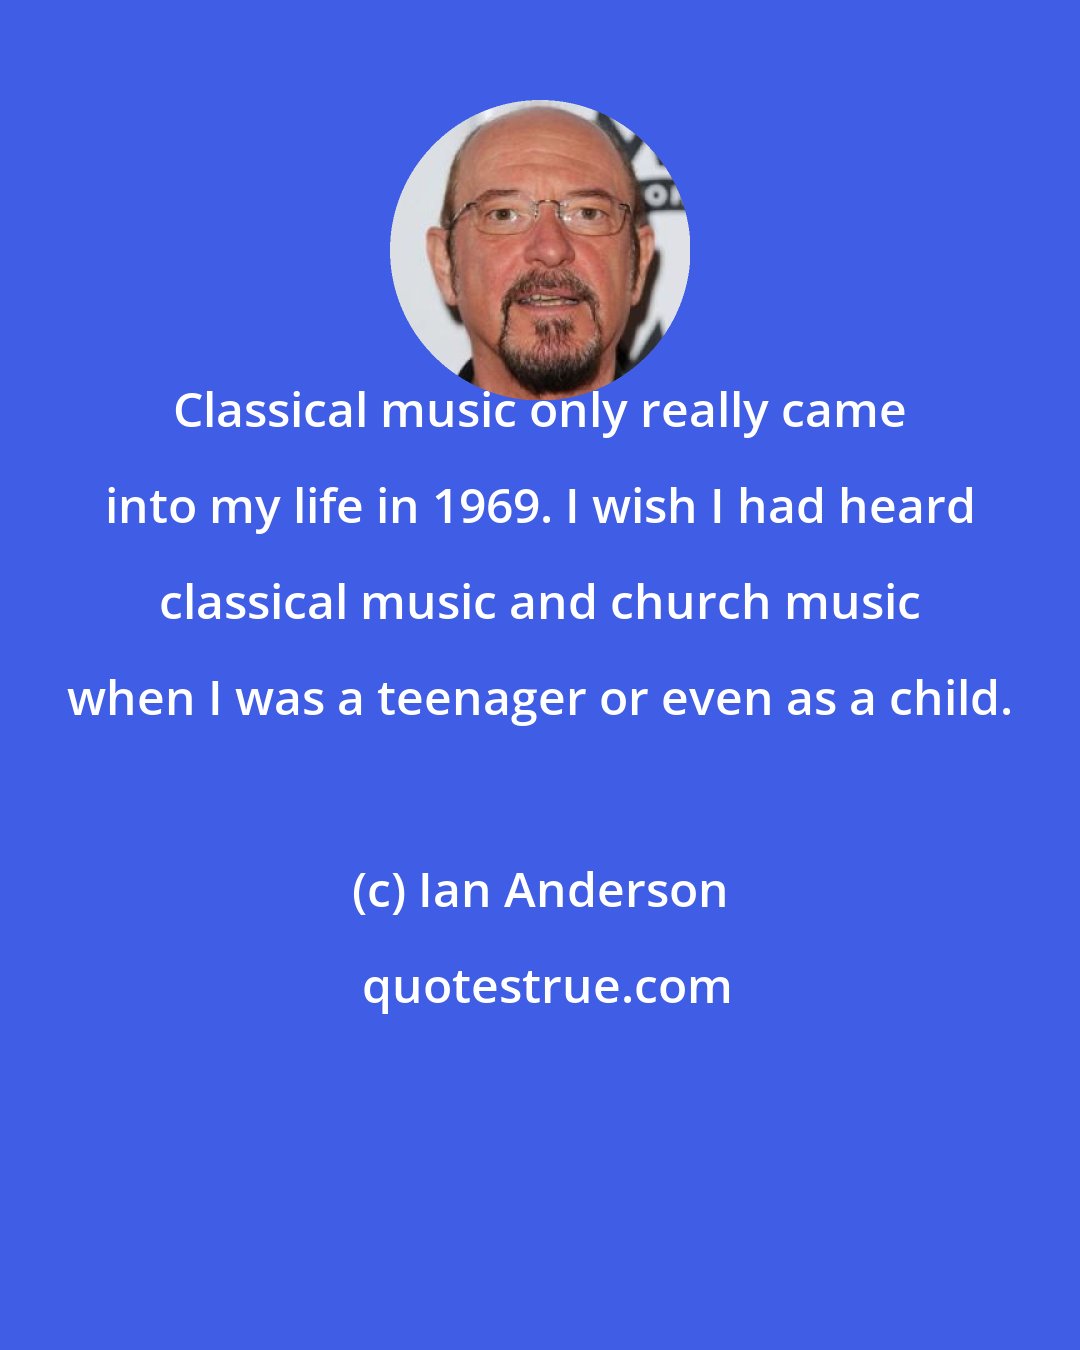 Ian Anderson: Classical music only really came into my life in 1969. I wish I had heard classical music and church music when I was a teenager or even as a child.